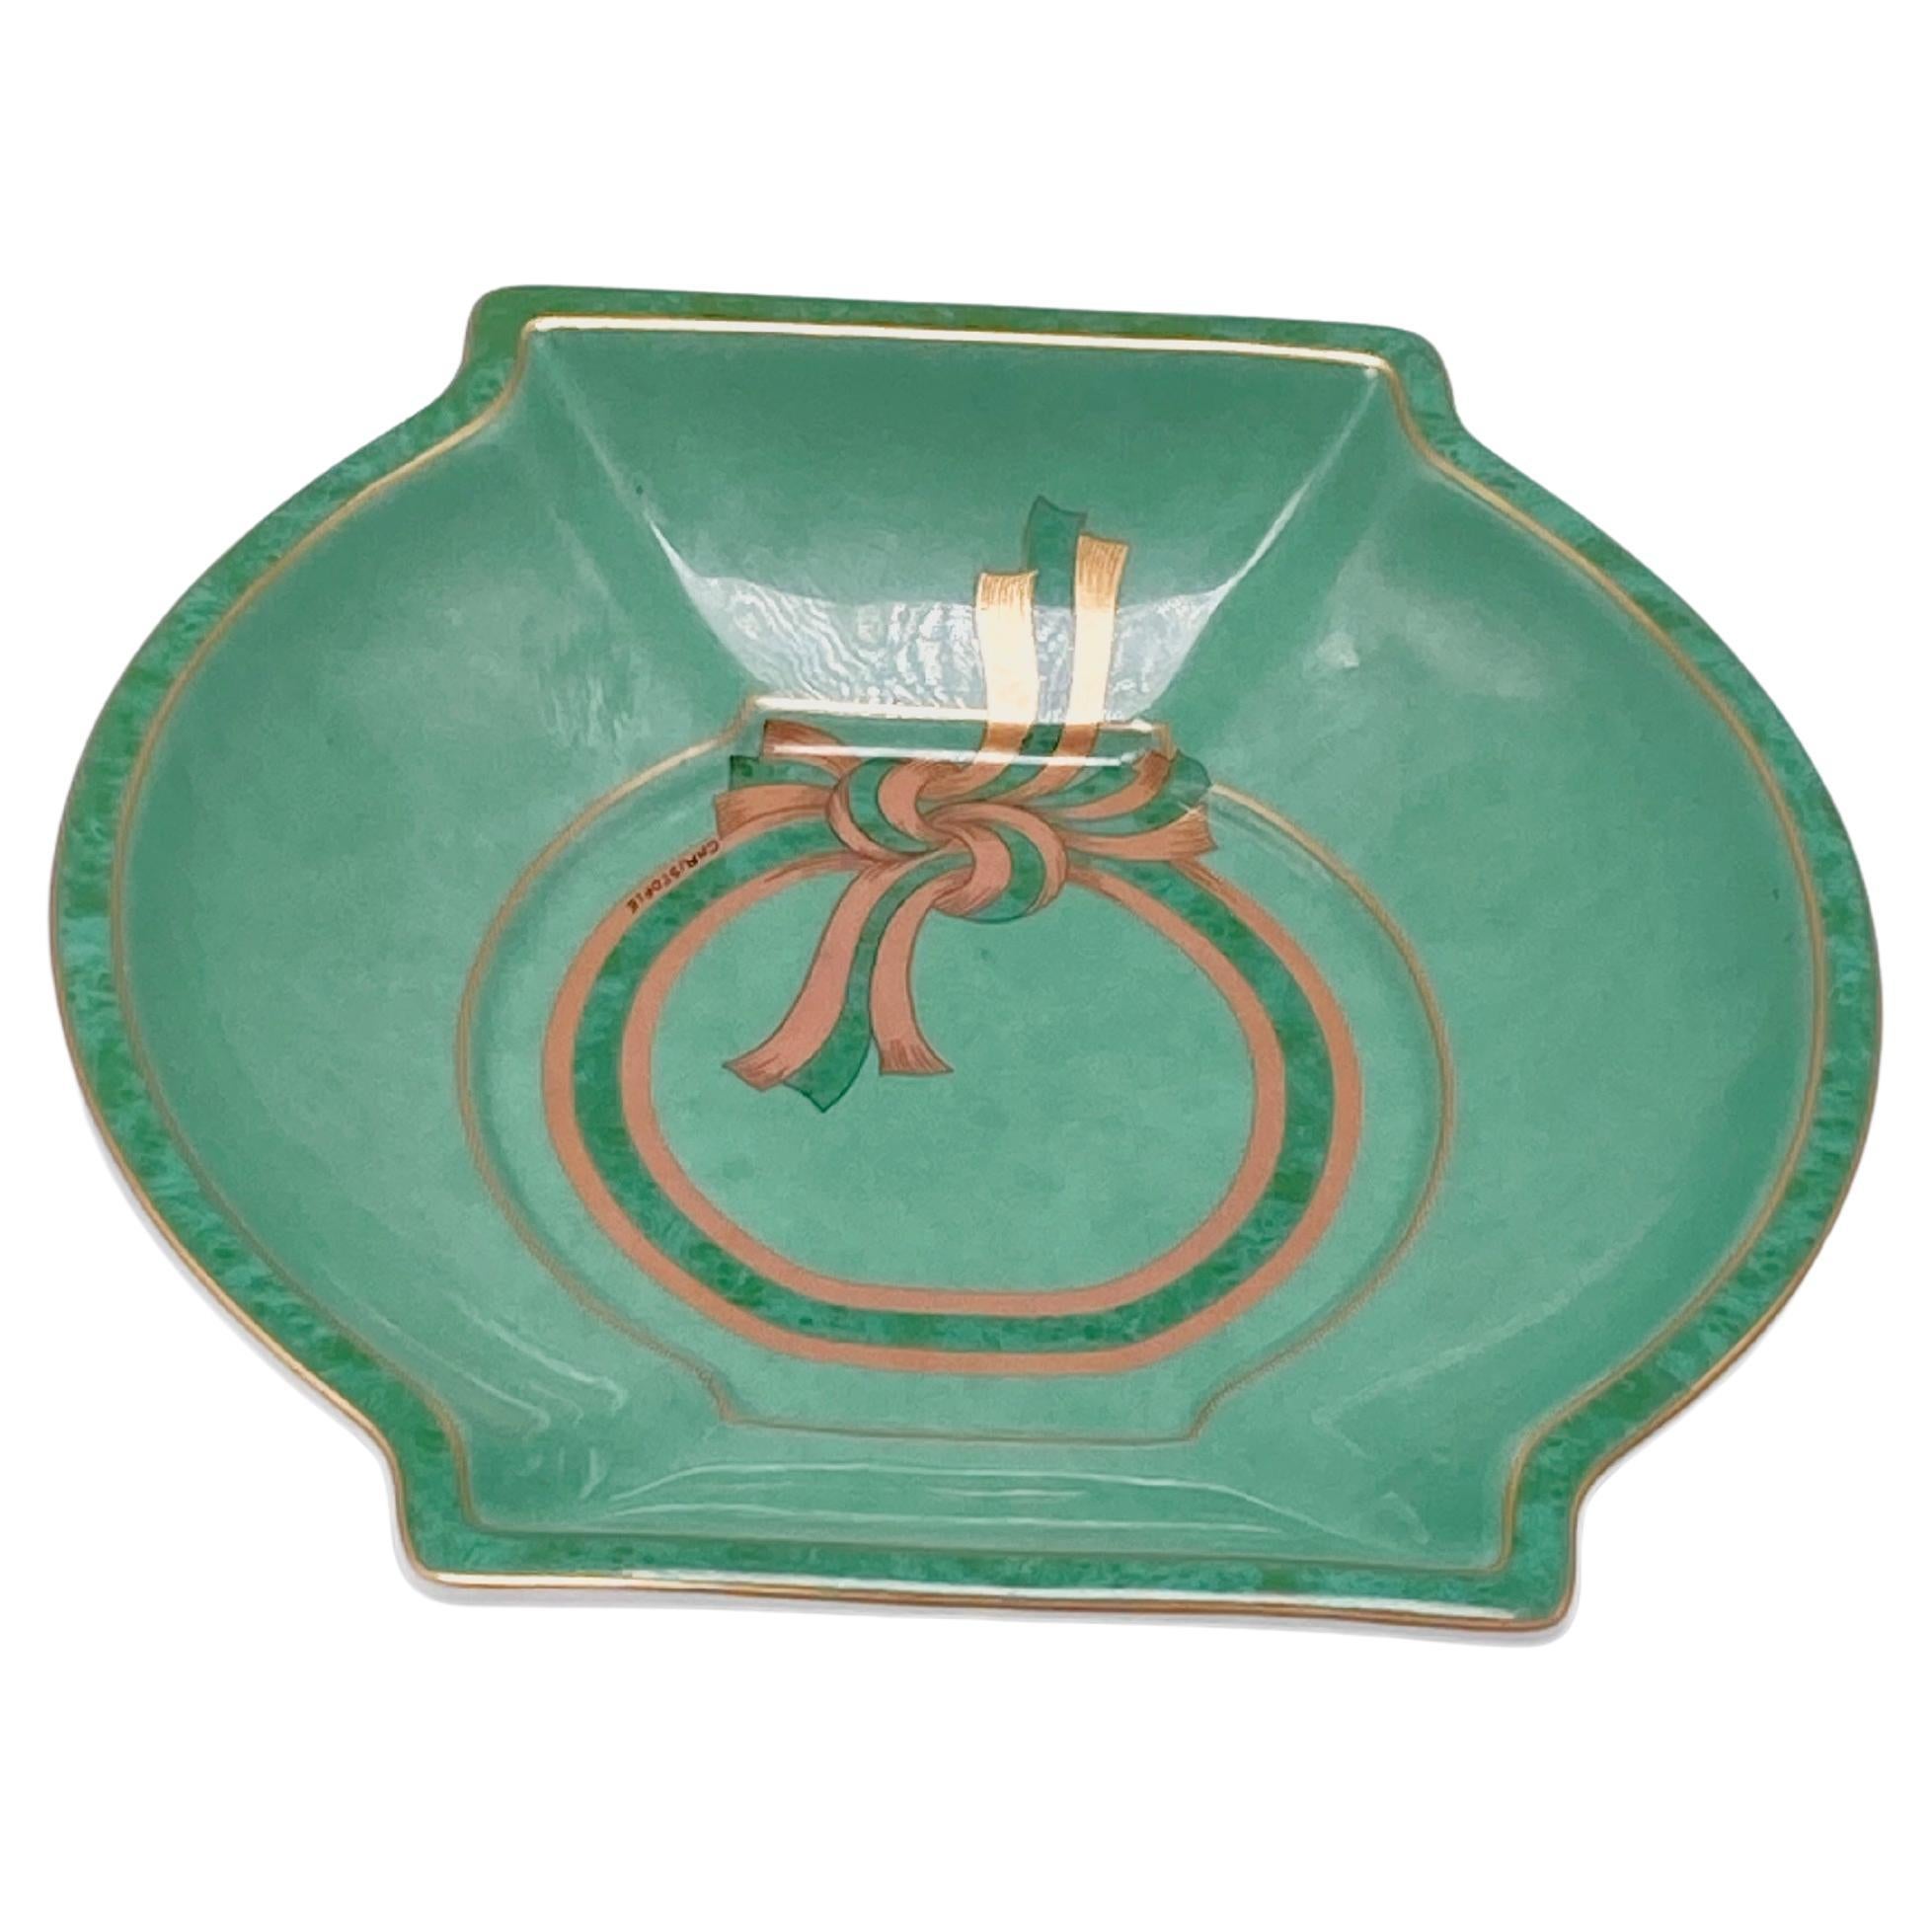  Rare Christofle Ashtray, in Porcelain, green hand painted, France 1970, signed  For Sale